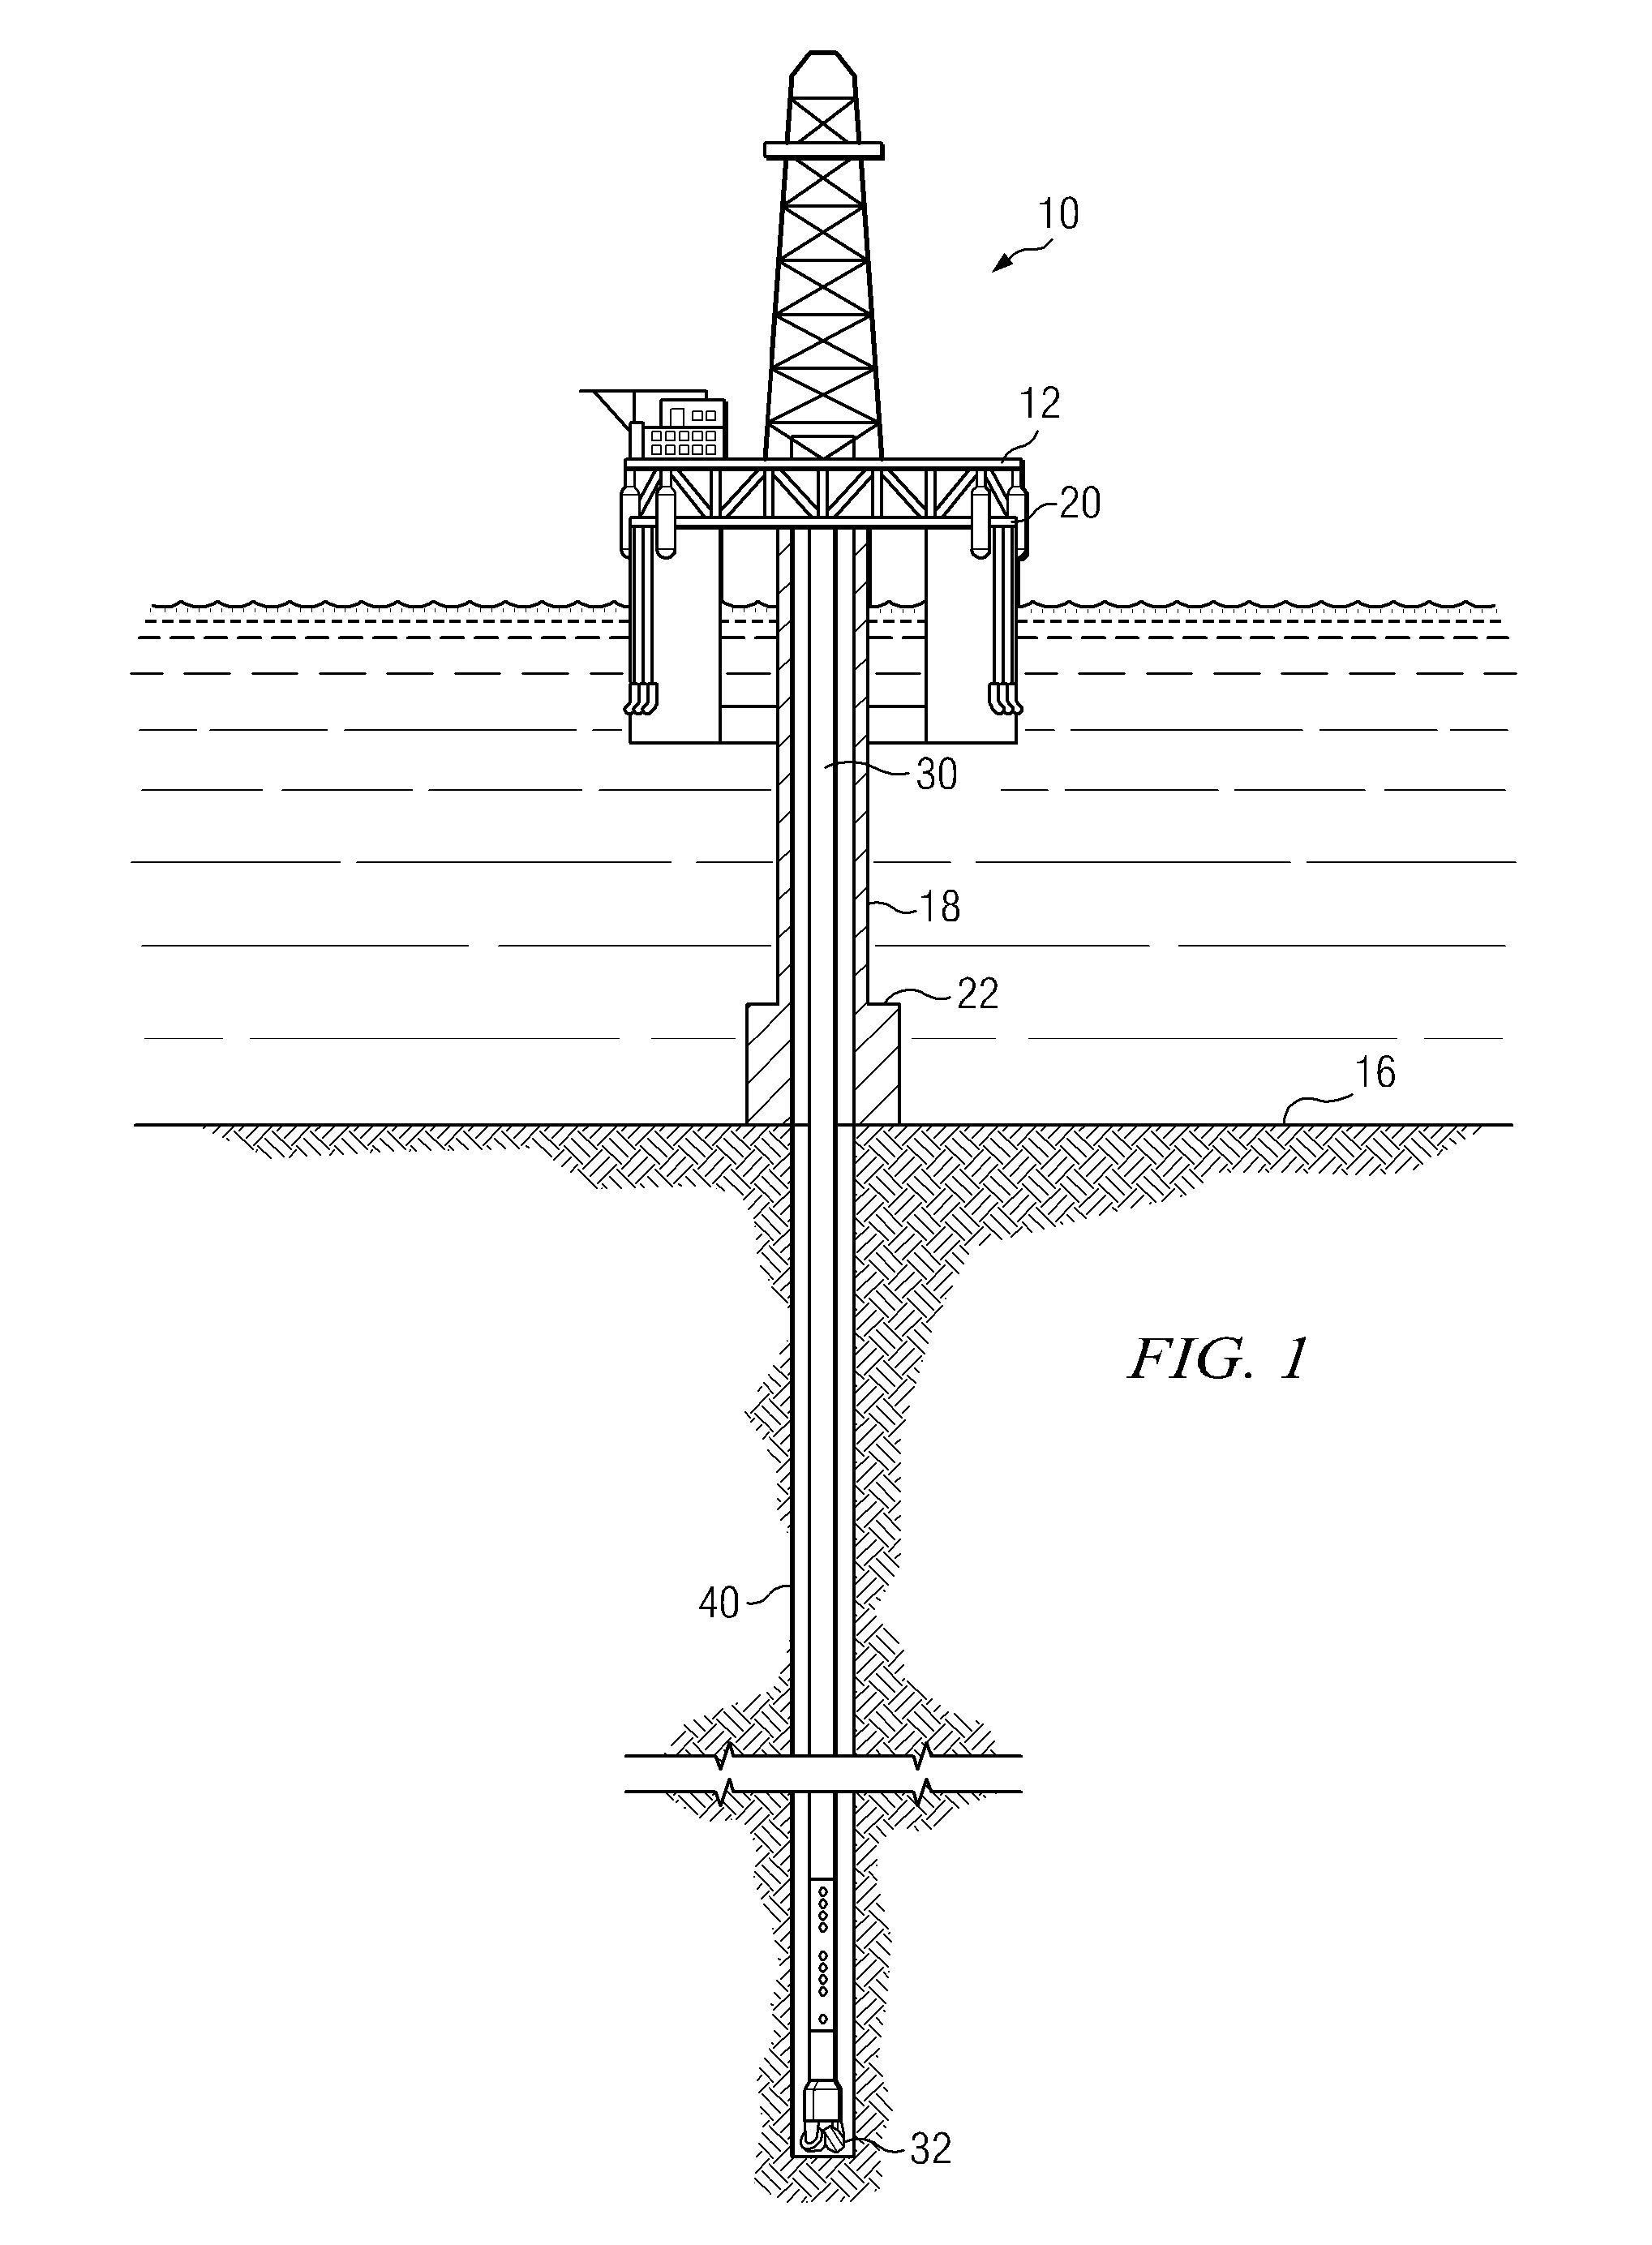 Downhole Sonic Logging Tool Including Irregularly Spaced Receivers